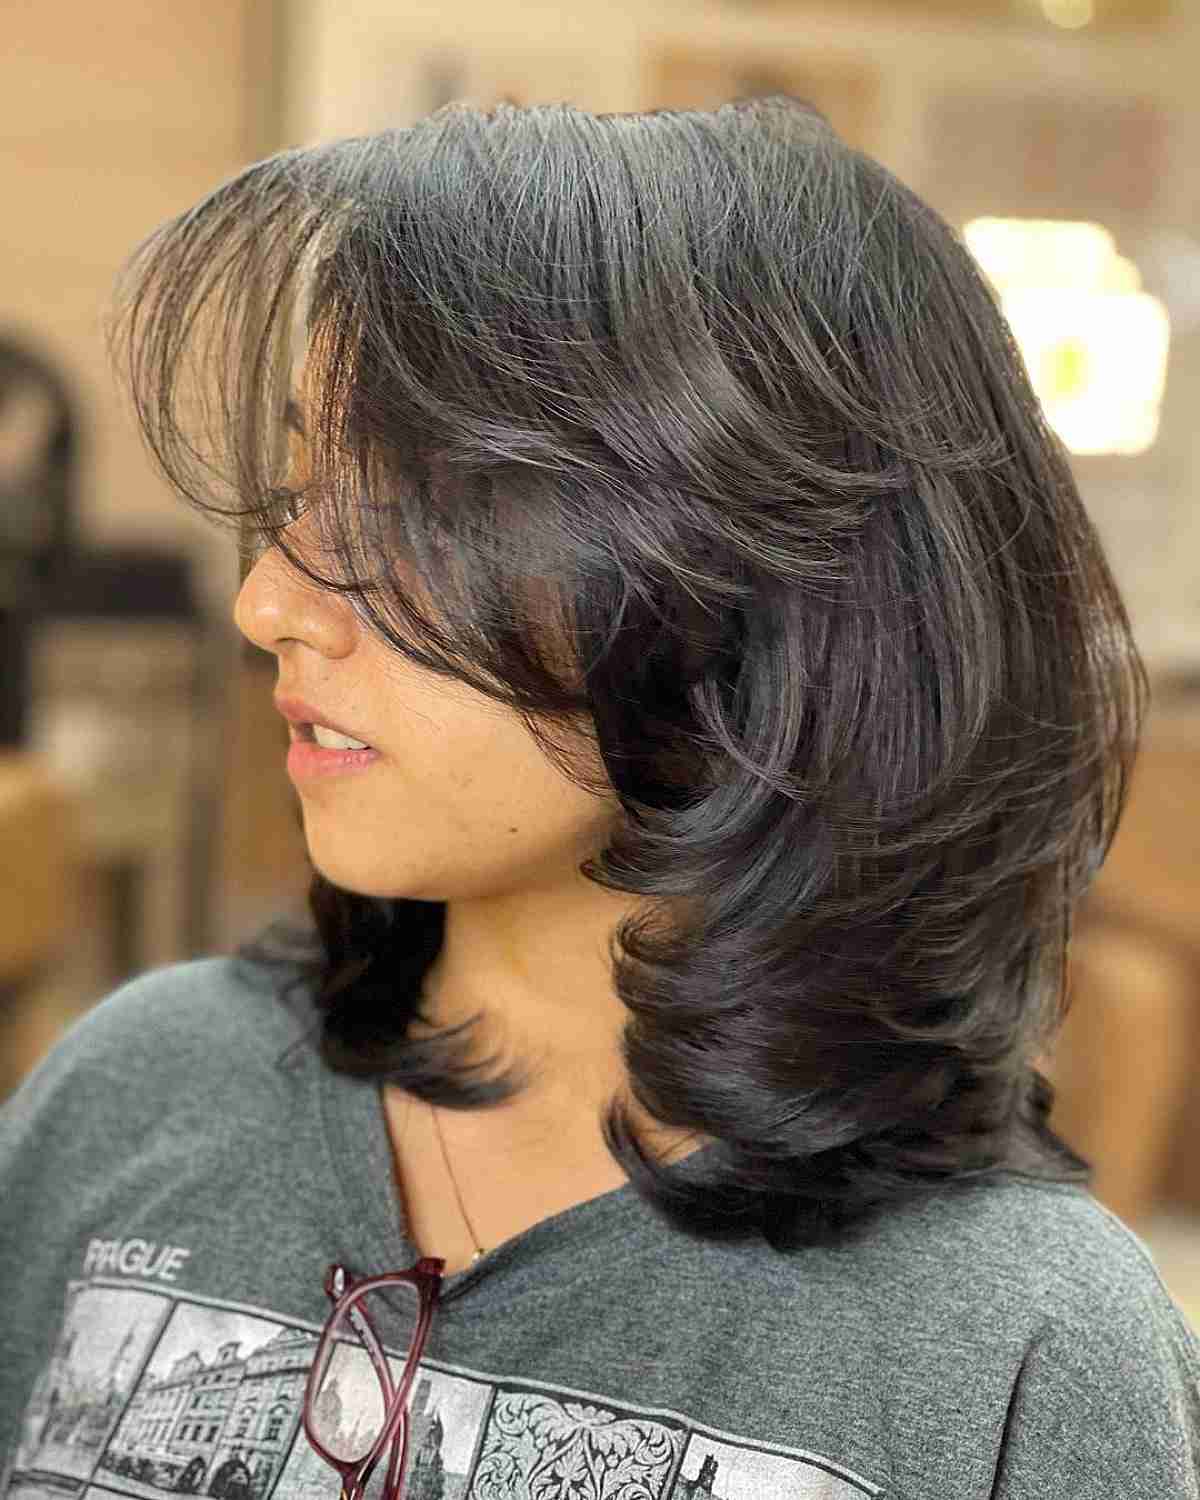 Layered Hair - Long, Short, Straight Types | How to Manage it?